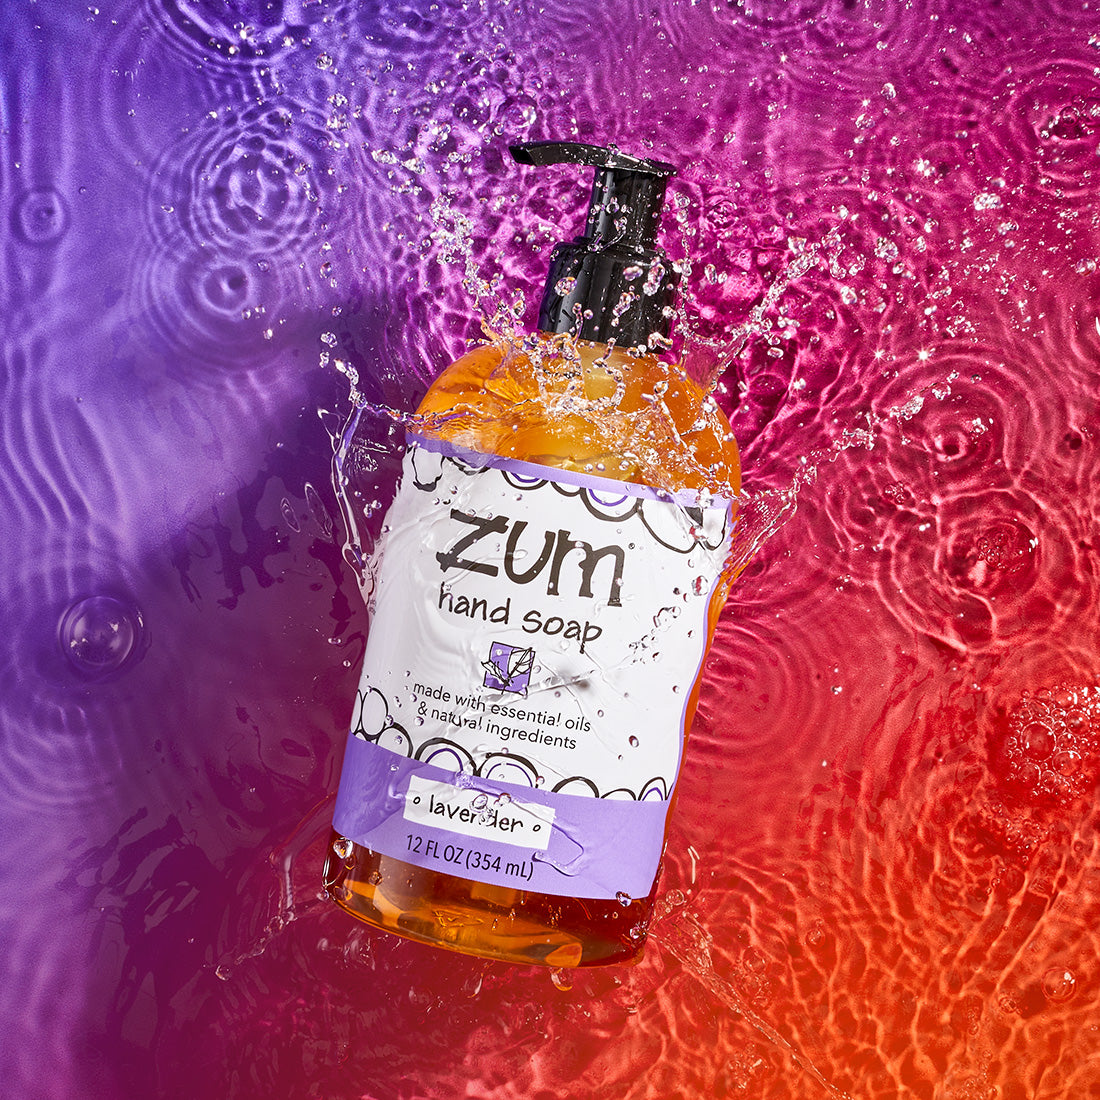 Lavender scented hand soap in a bottle with a pump, falling onto a watered surface with splashing. Purple to orange gradient background.